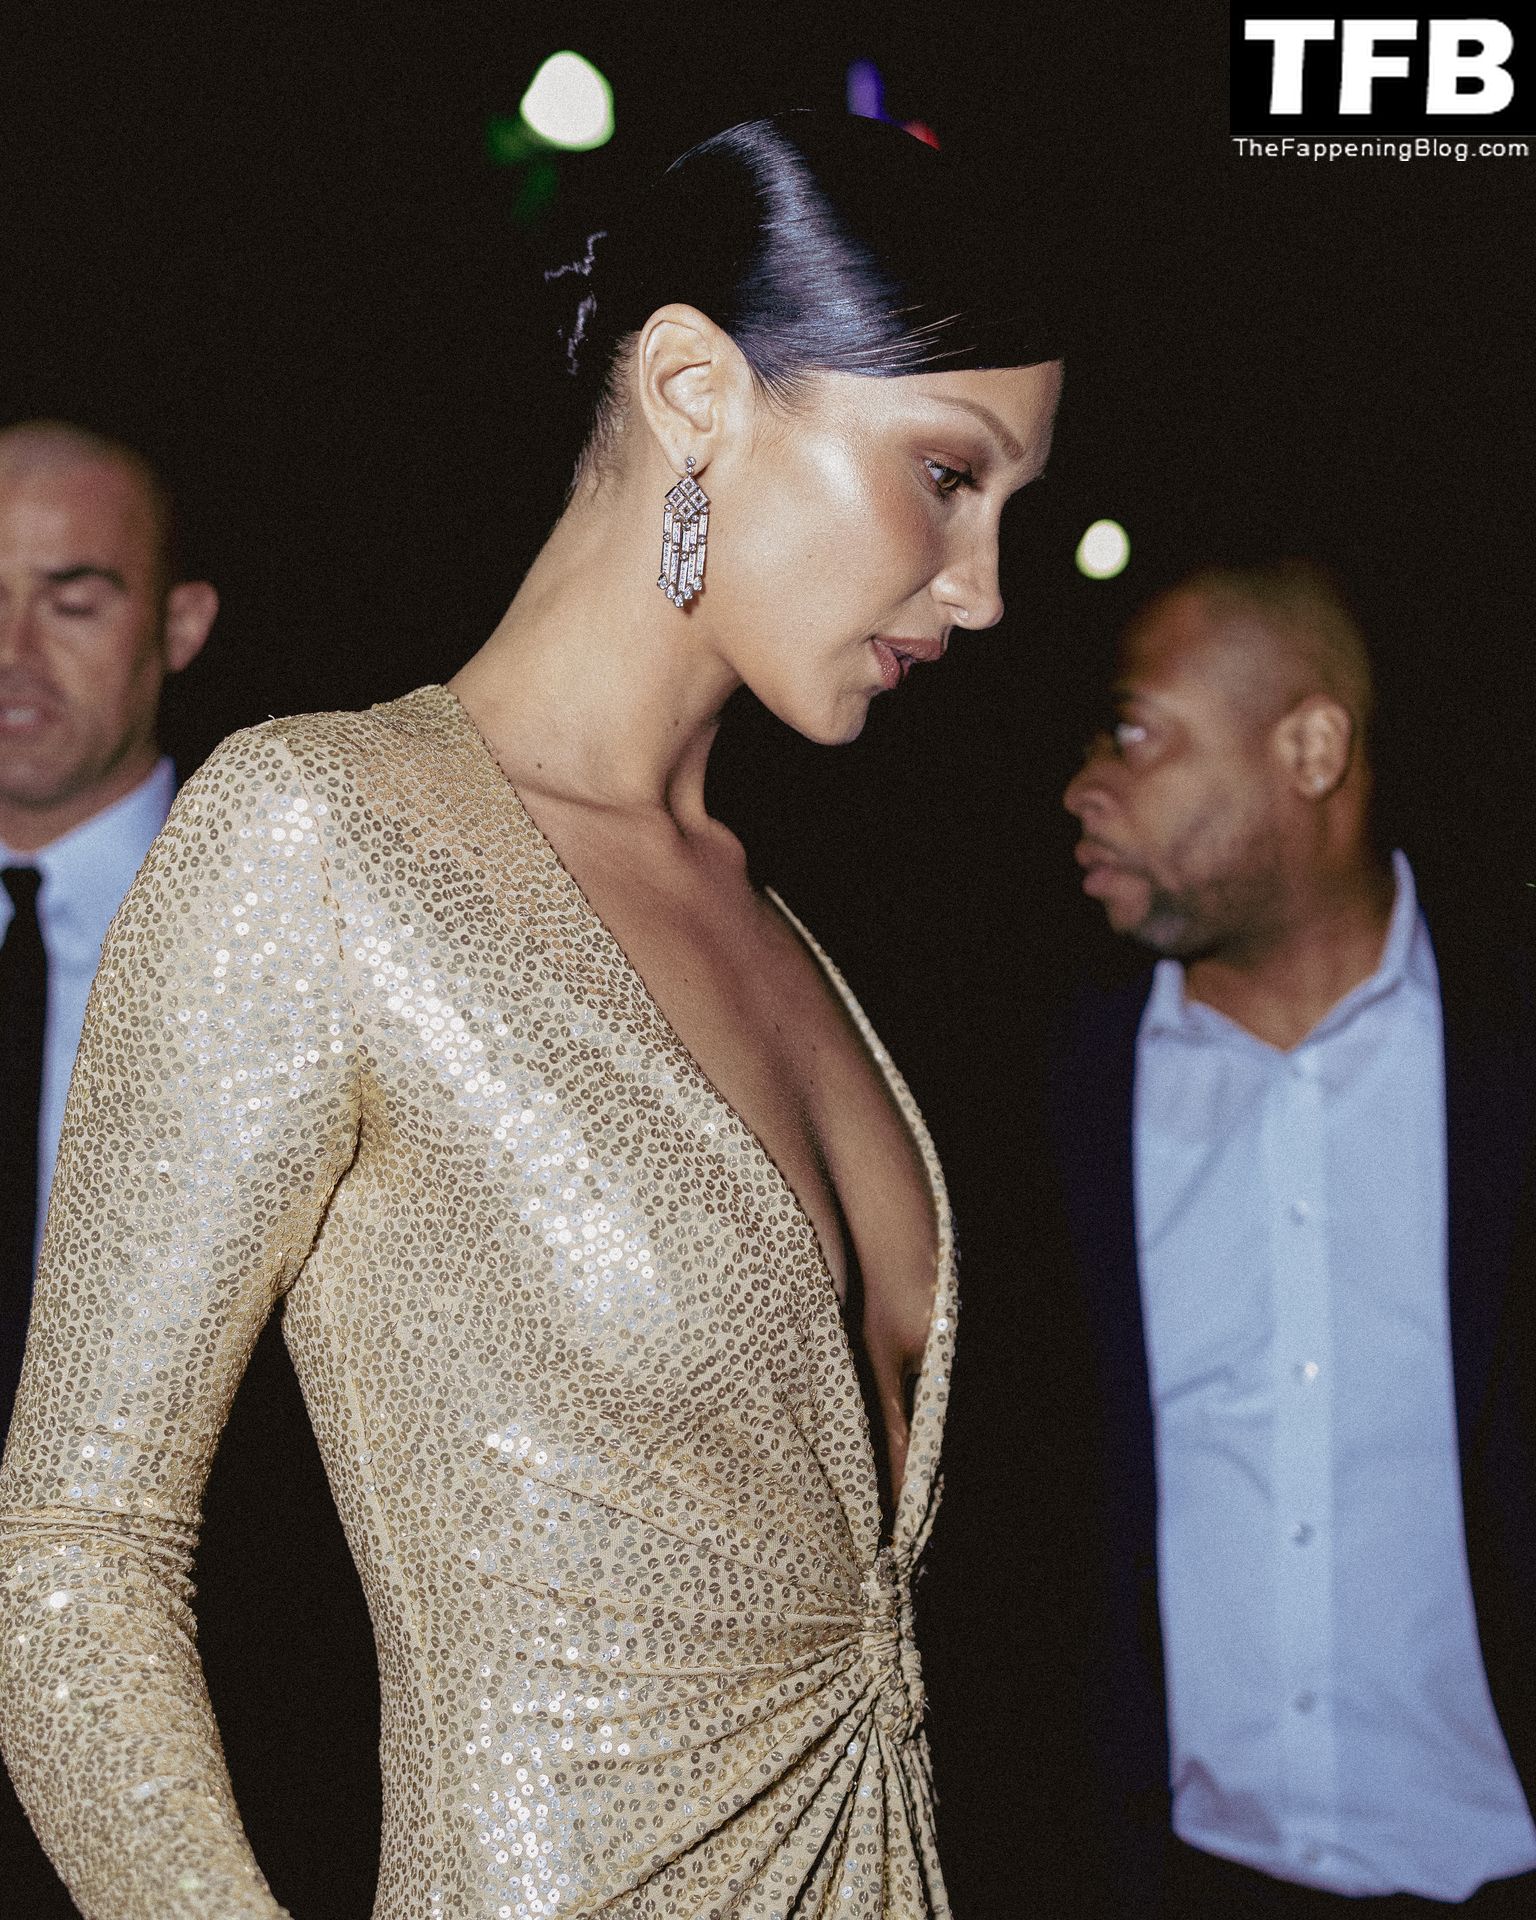 Bella Hadid Arrives at ‘God’s Love We Deliver Golden’ Event in NYC (135 Photos)